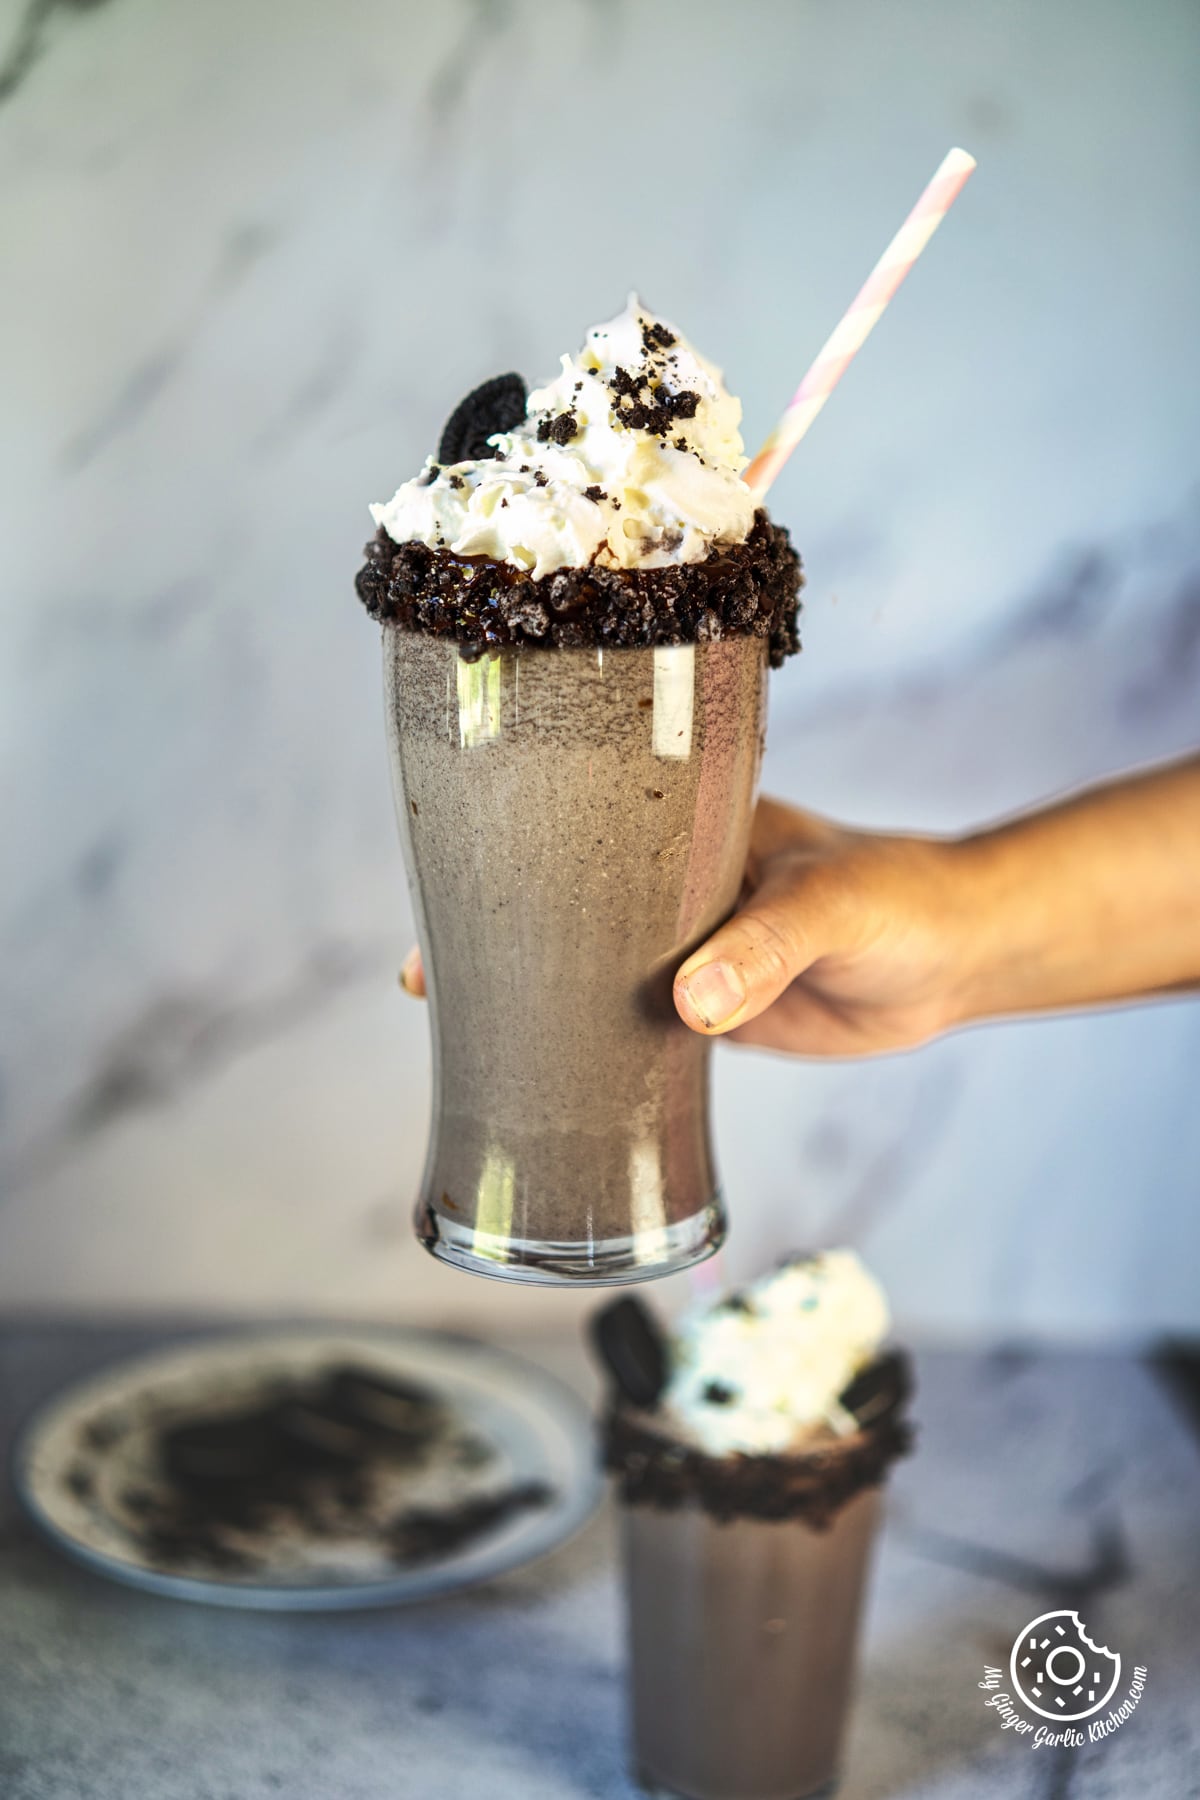 photos of someone holding a tall glass with a chocolate oreo milkshake in it